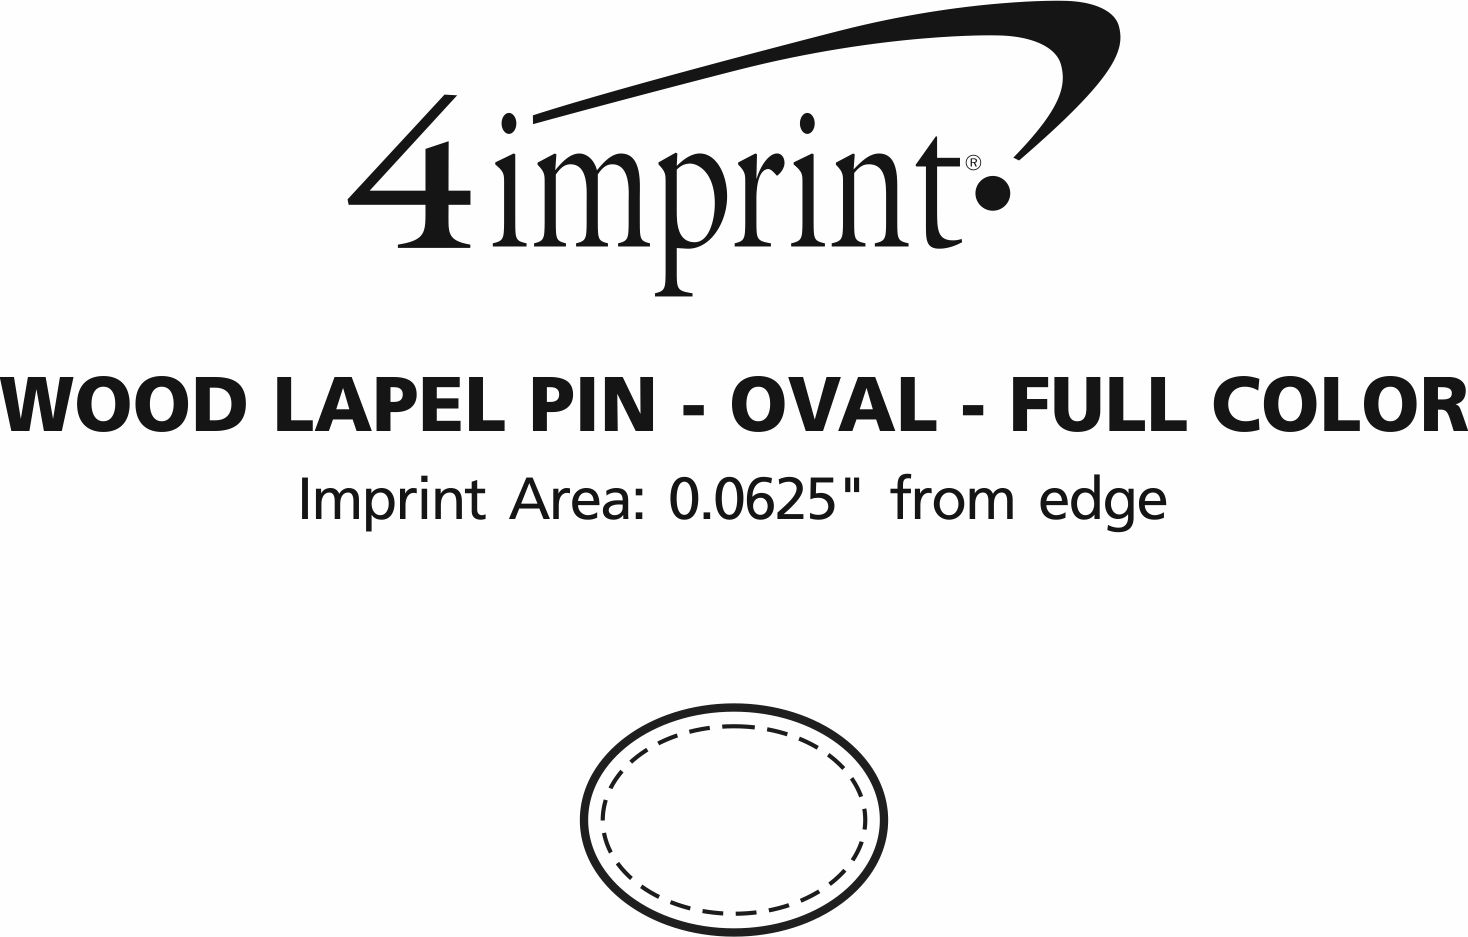 Imprint Area of Wood Lapel Pin - Oval - Full Color